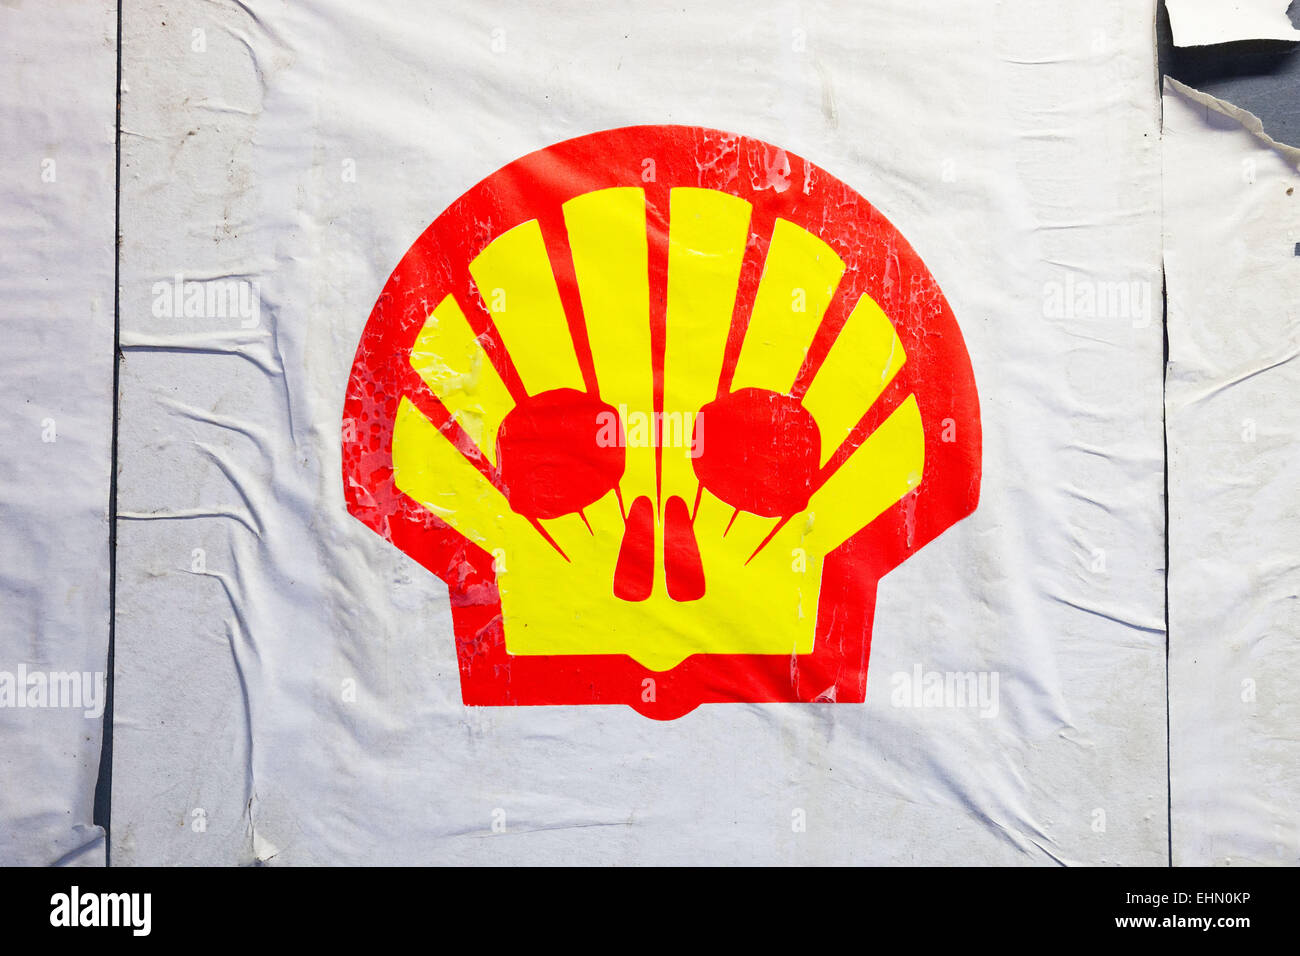 Logo of the oil company Shell hijacked by environmental activists denouncing the responsibility of Shell's oil pollution. Stock Photo